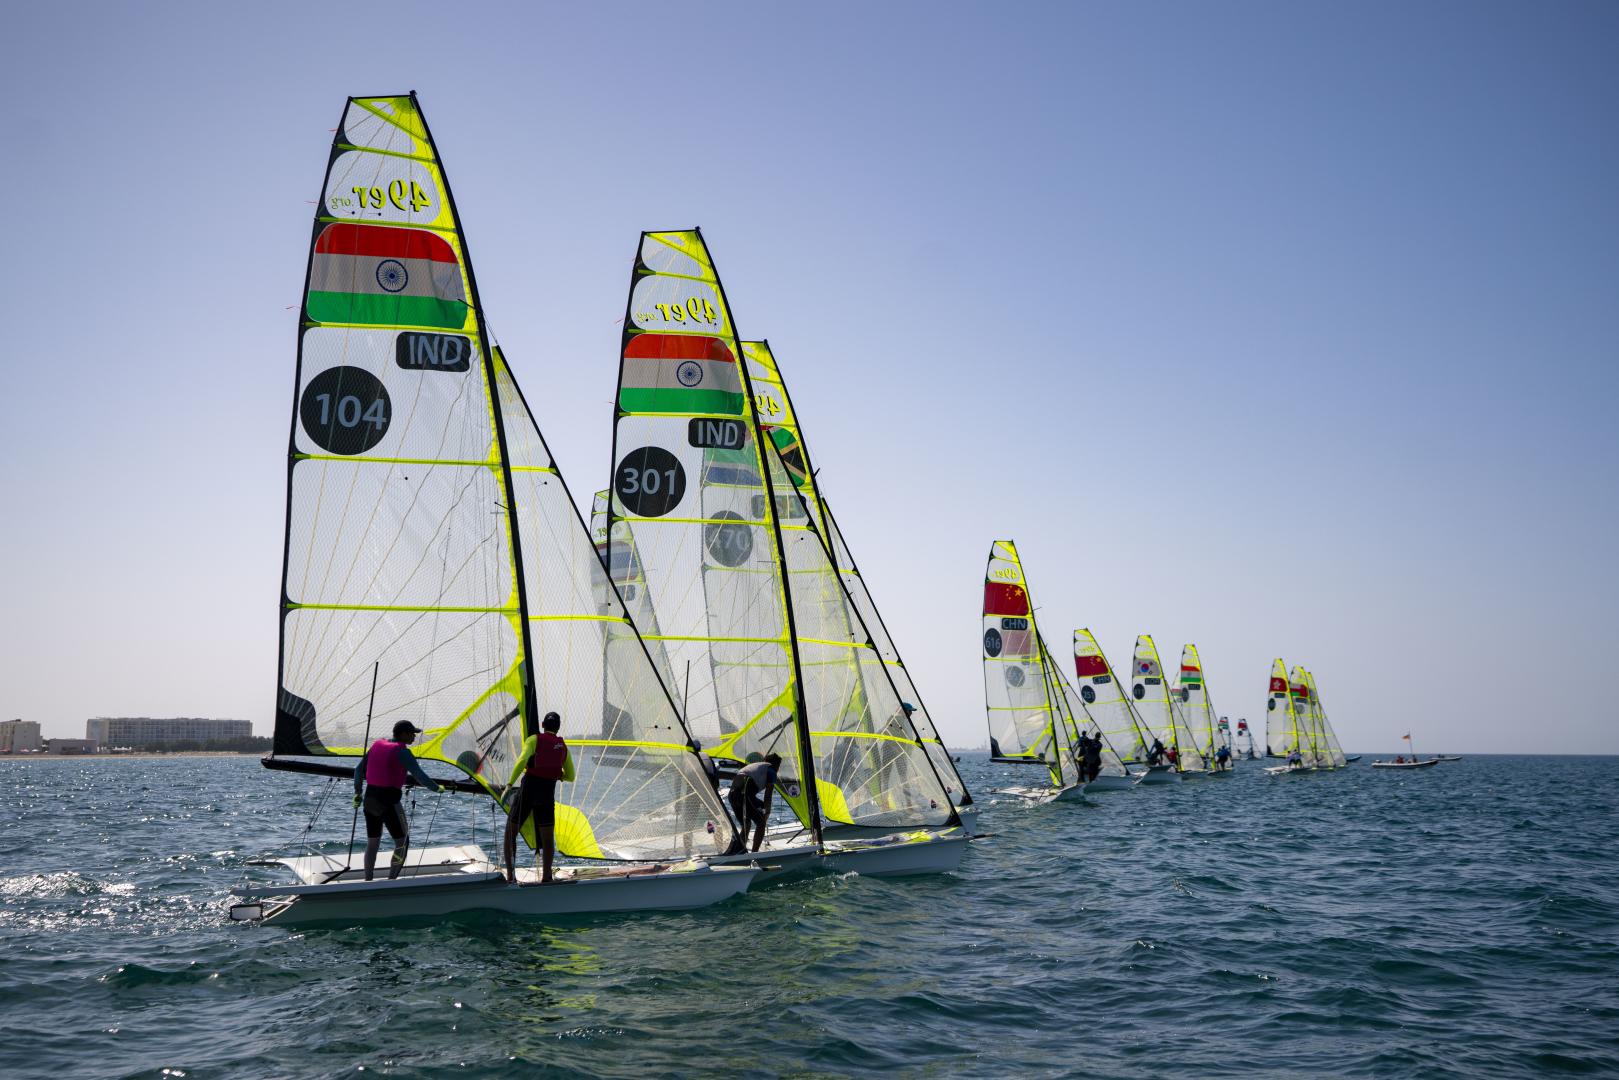 Mussanah Open Championship kicks off as Olympic hopefuls look to book their place in Tokyo